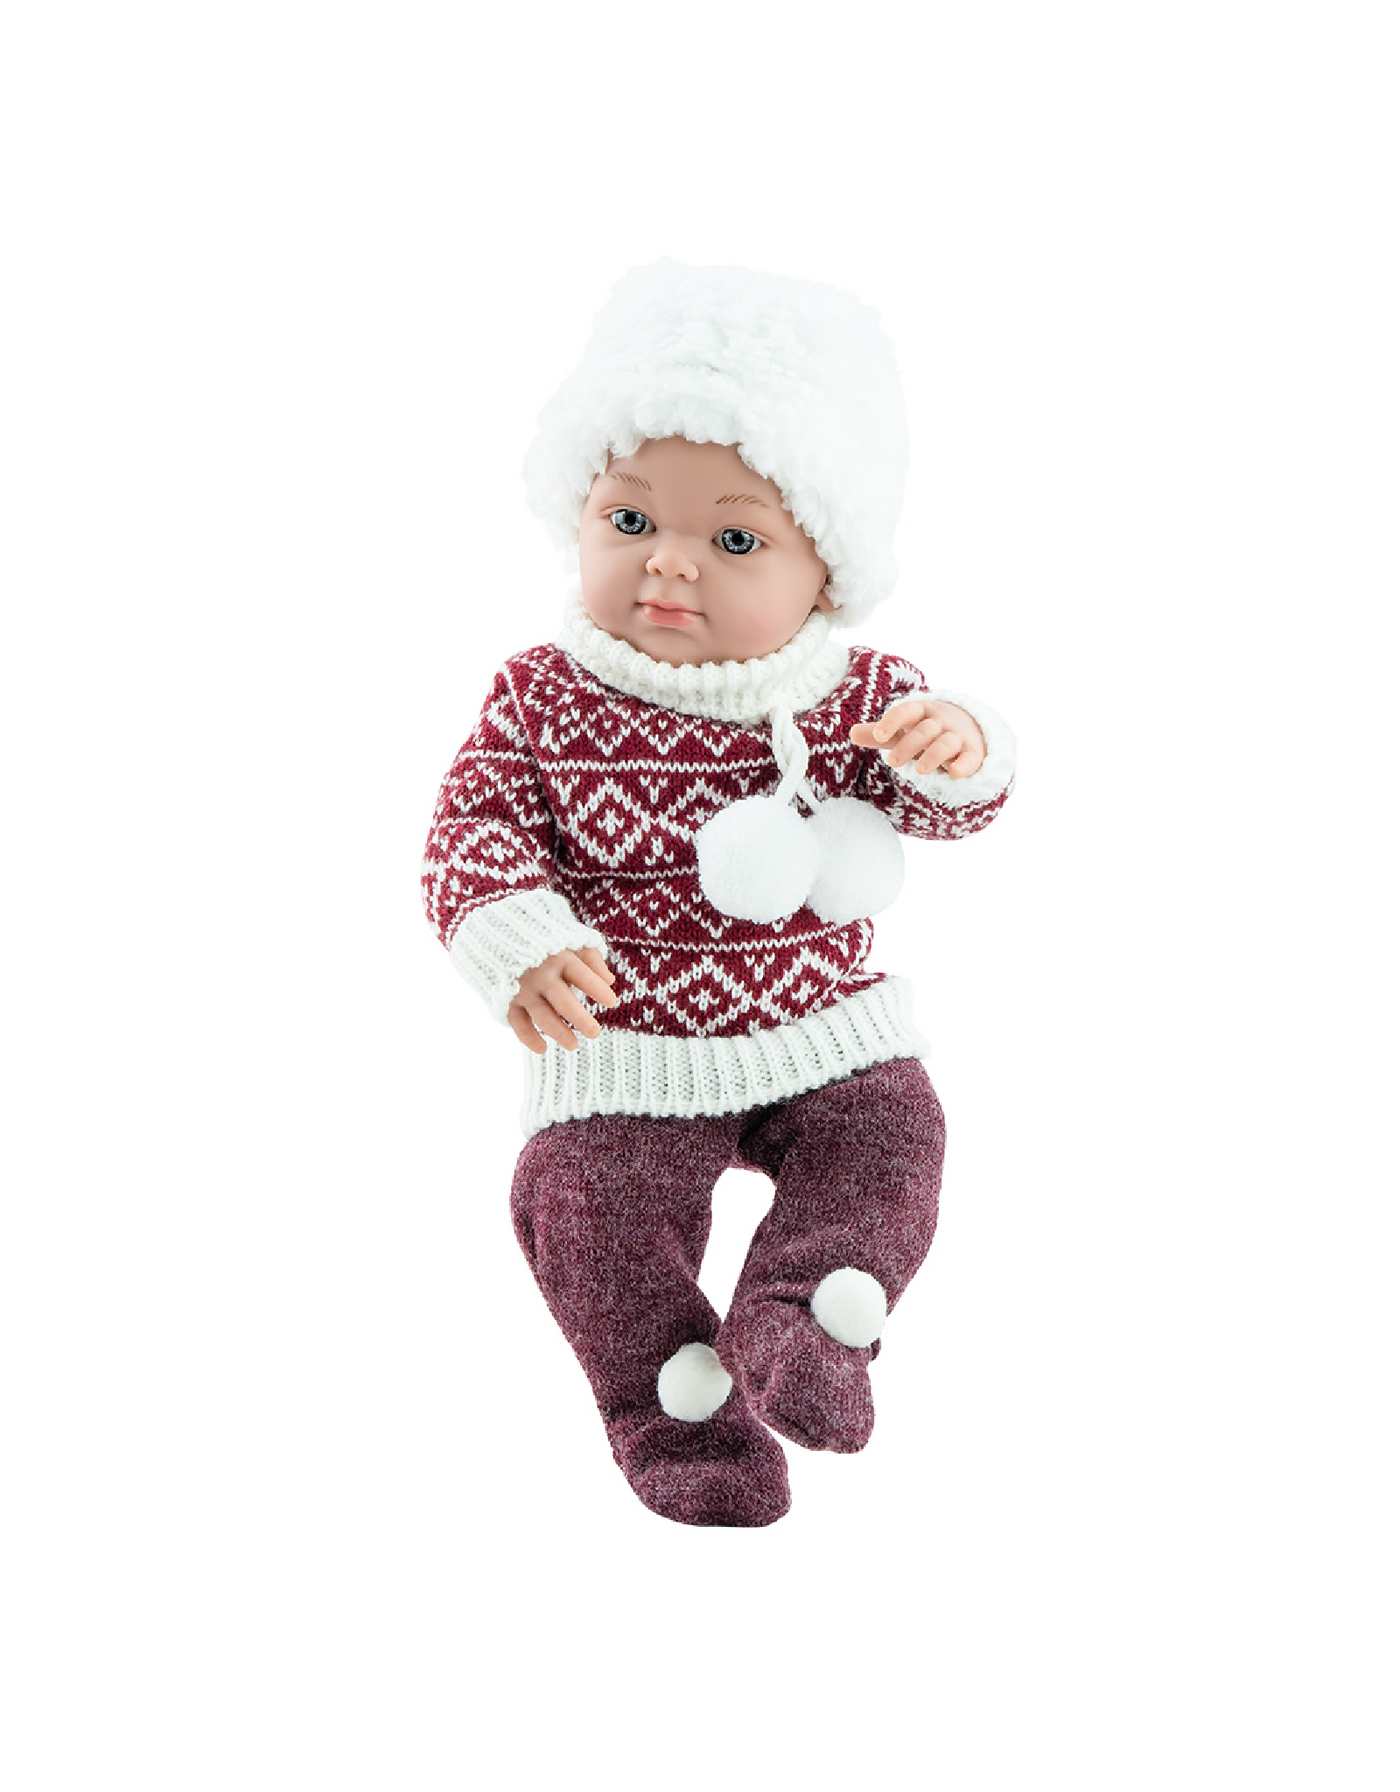 Mini Pikolines Doll - Baby girl with wool sweater and white hat - Paola Reina